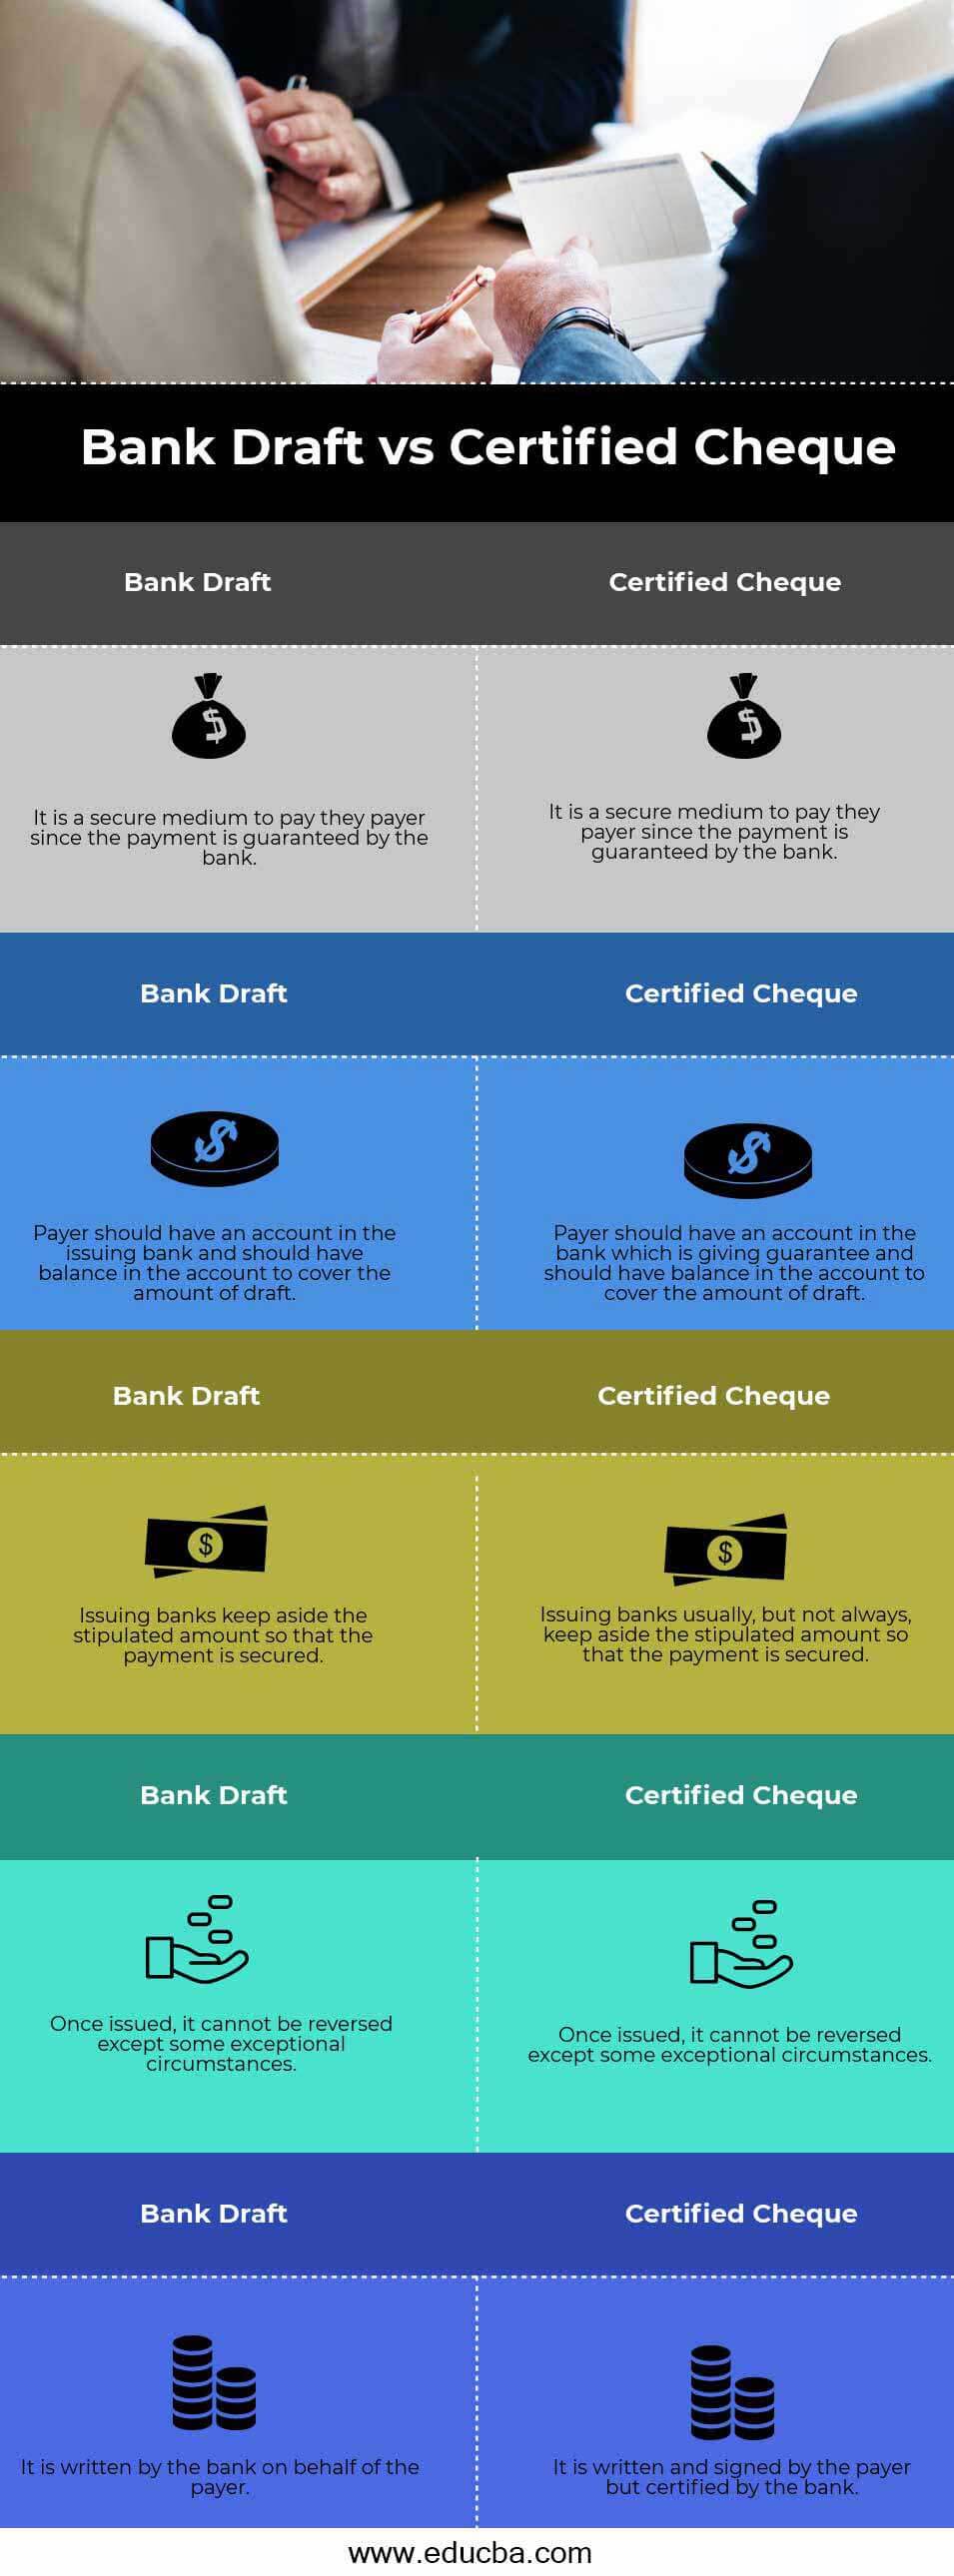 Bank Draft vs Certified Cheque info